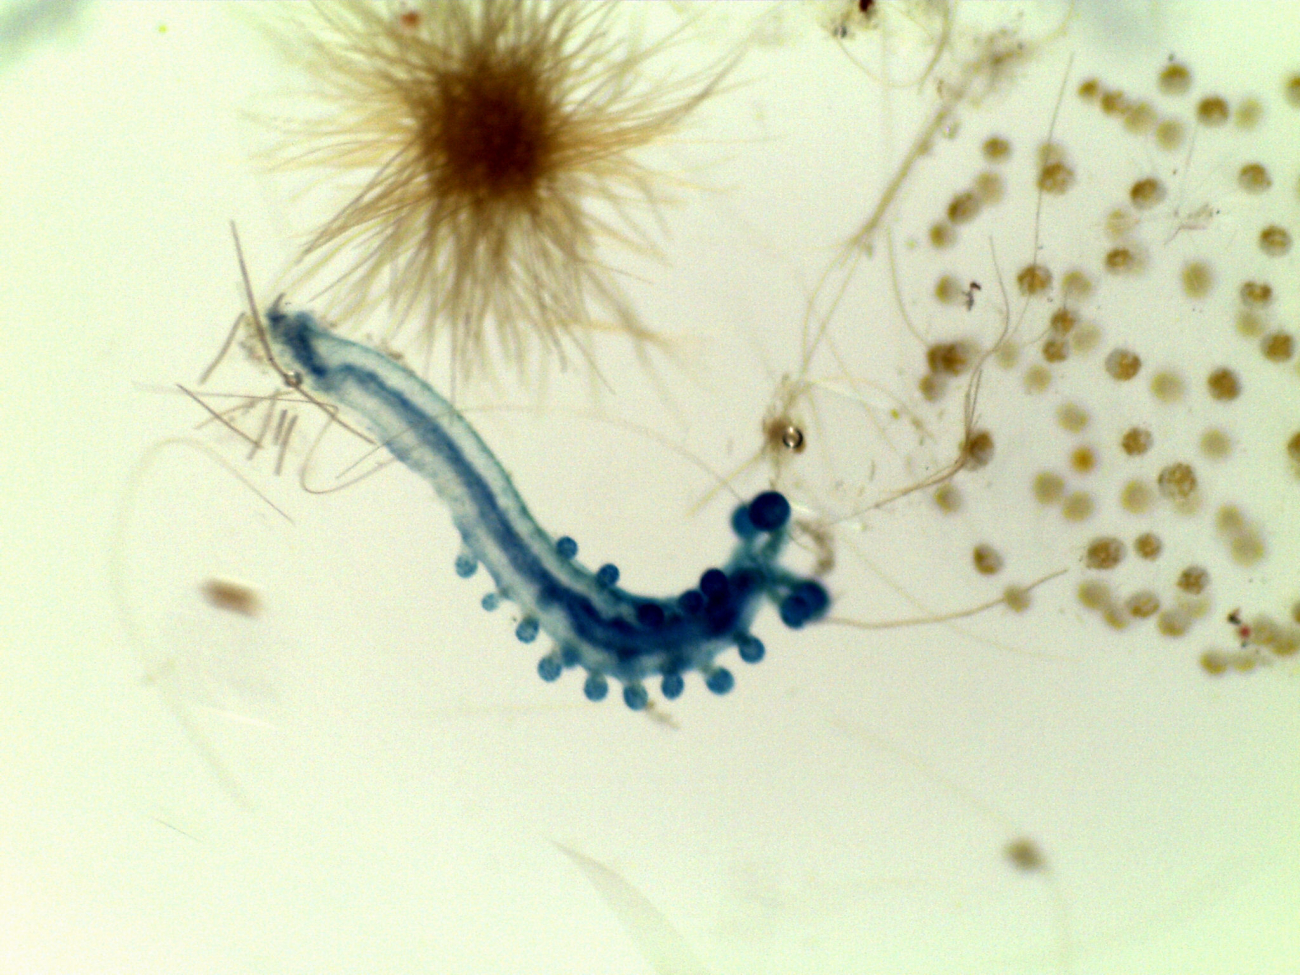 Various small planktonic life forms seen under the microscope